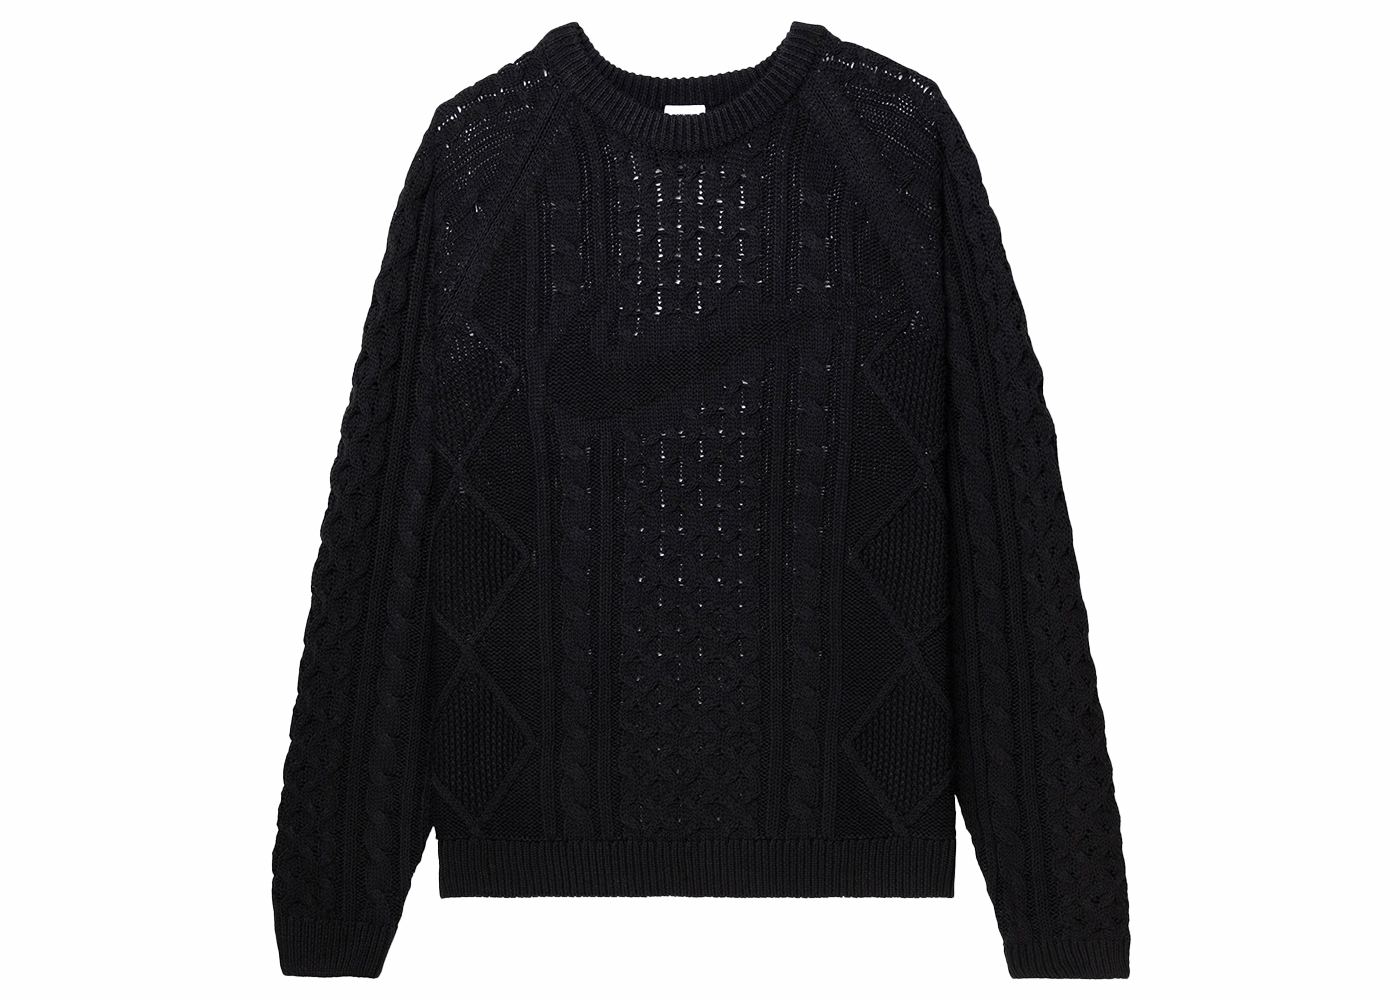 Nike Cable Knit L/S Sweater (US Sizing) Black Men's - FW23 - US